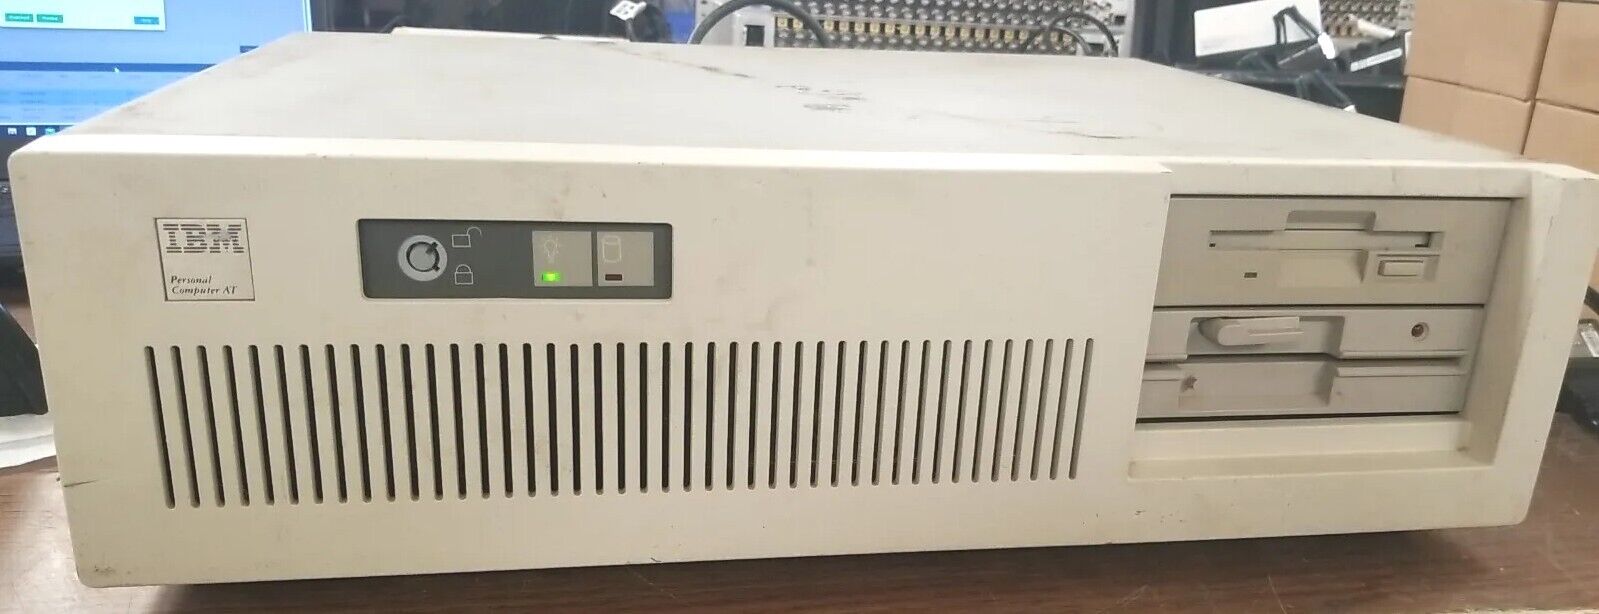 Vintage IBM 5170 Personal Computer AT  1984  - Powers On